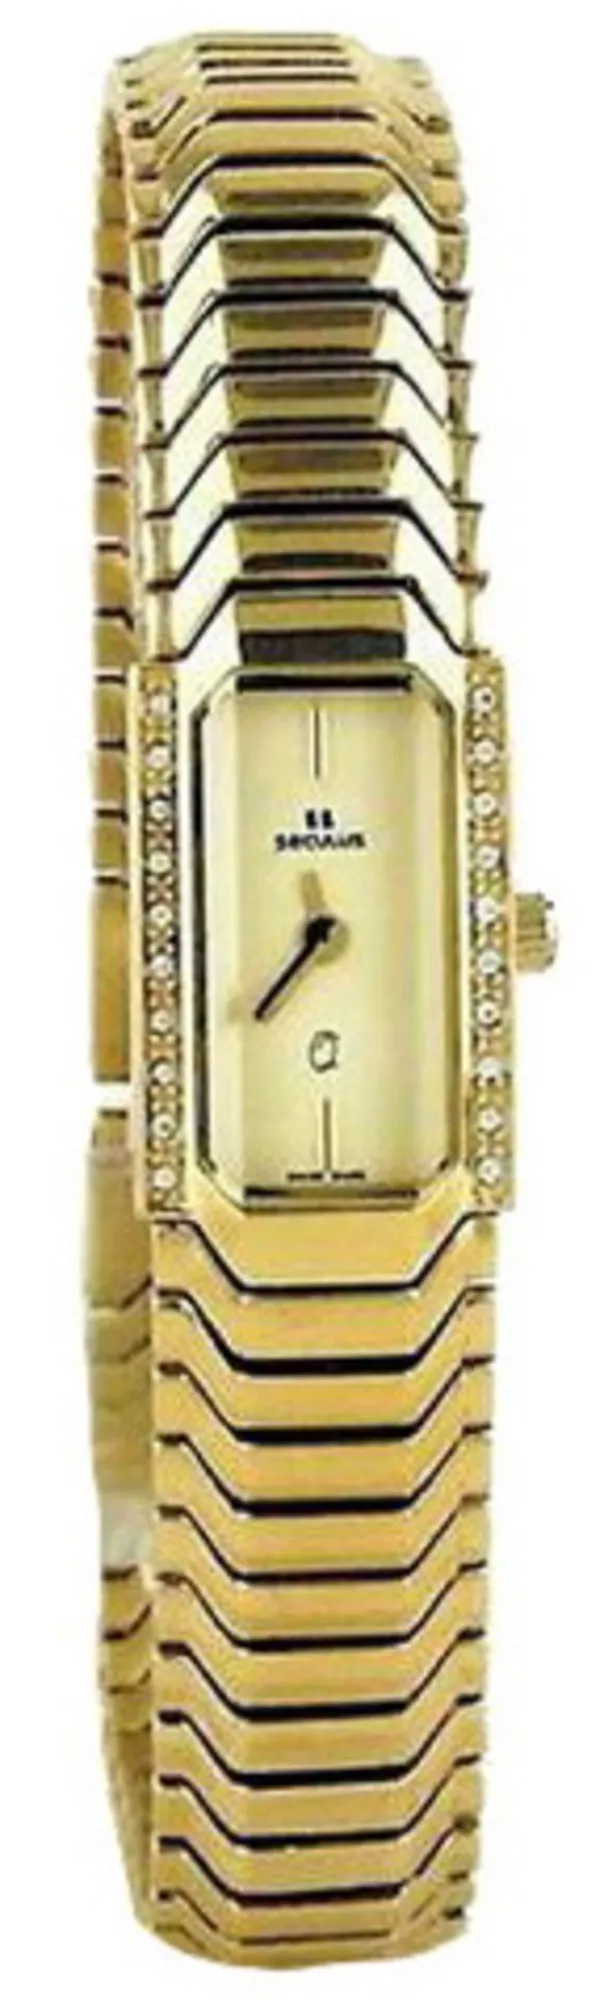 Часы Seculus 1634.2.732 pvd with stones case, yellow dial, pvd